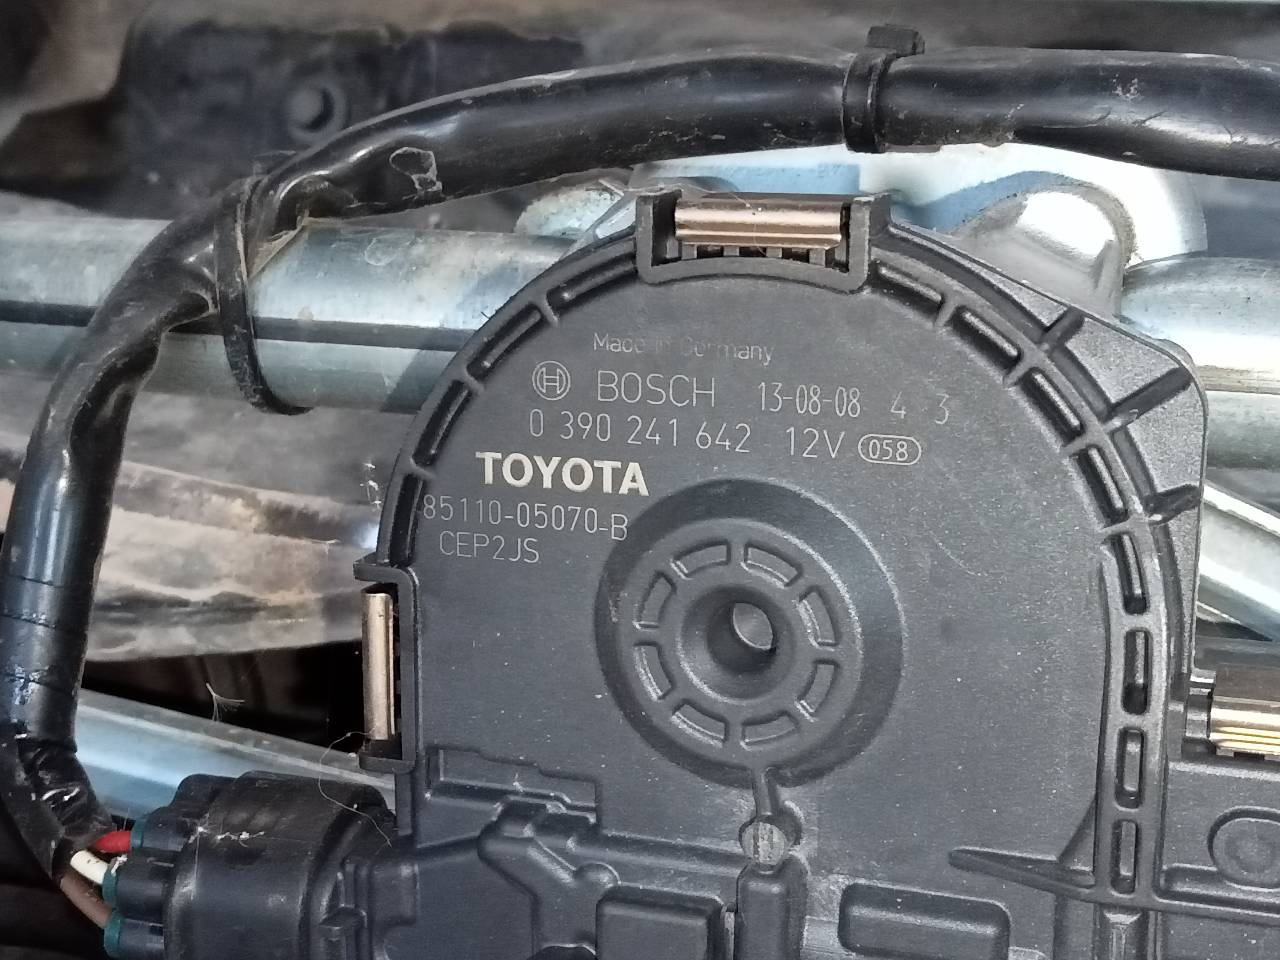 TOYOTA Avensis T27 Front Windshield Wiper Mechanism 8511005070, 0390241642 20958594